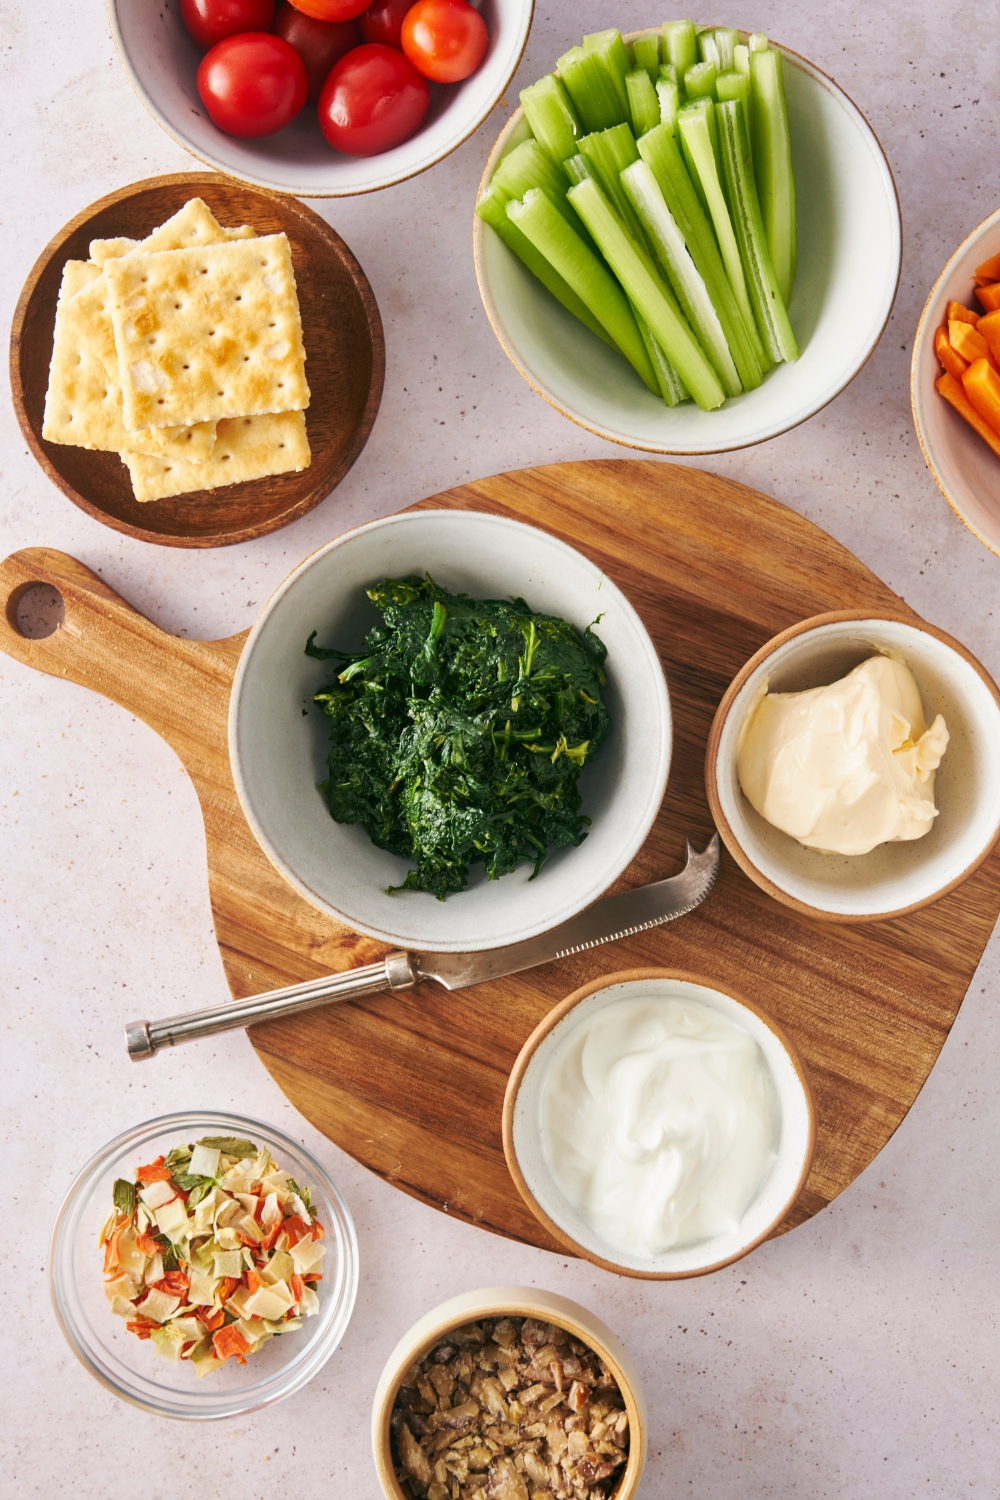 A display of multiple bowl with the ingredients to make Knorr Spinach Dip and dippers for it.